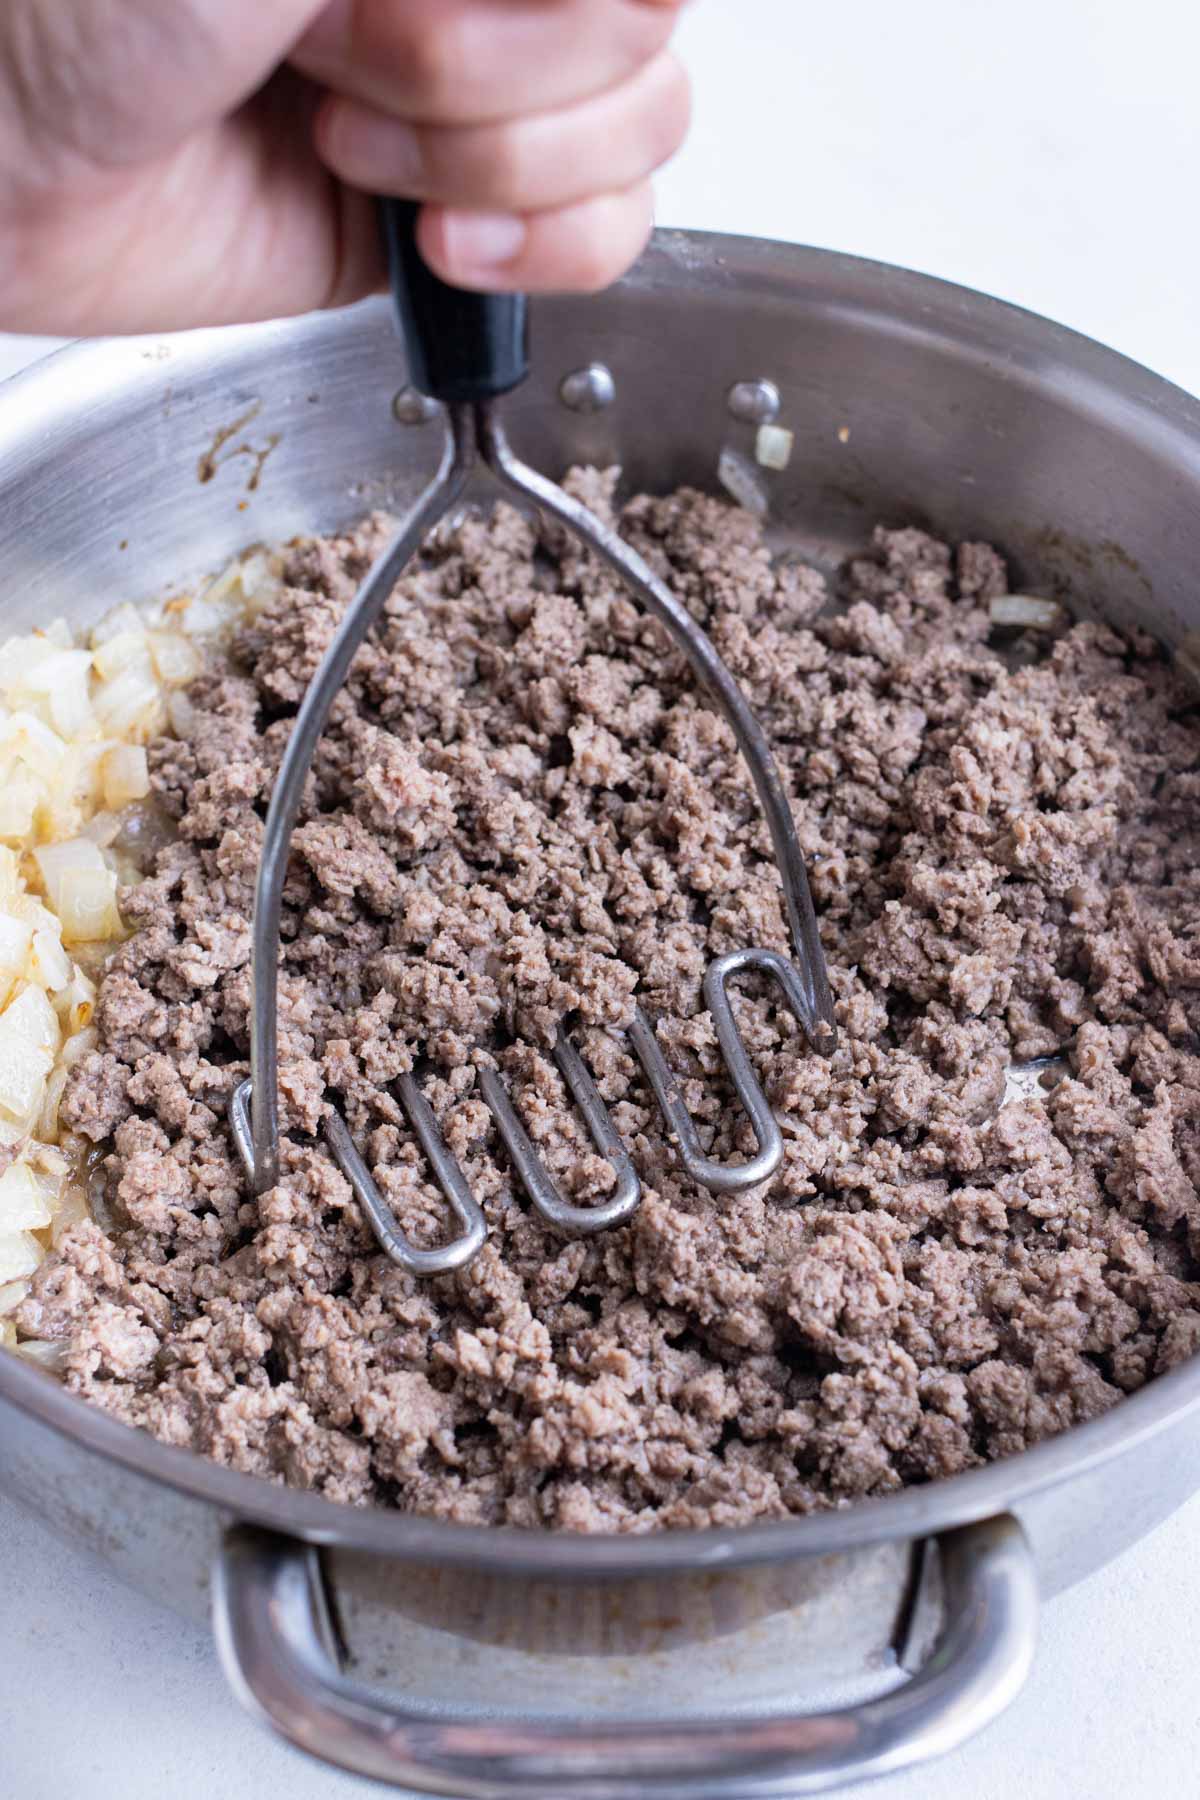 A potato masher breaks up cooked ground meat.